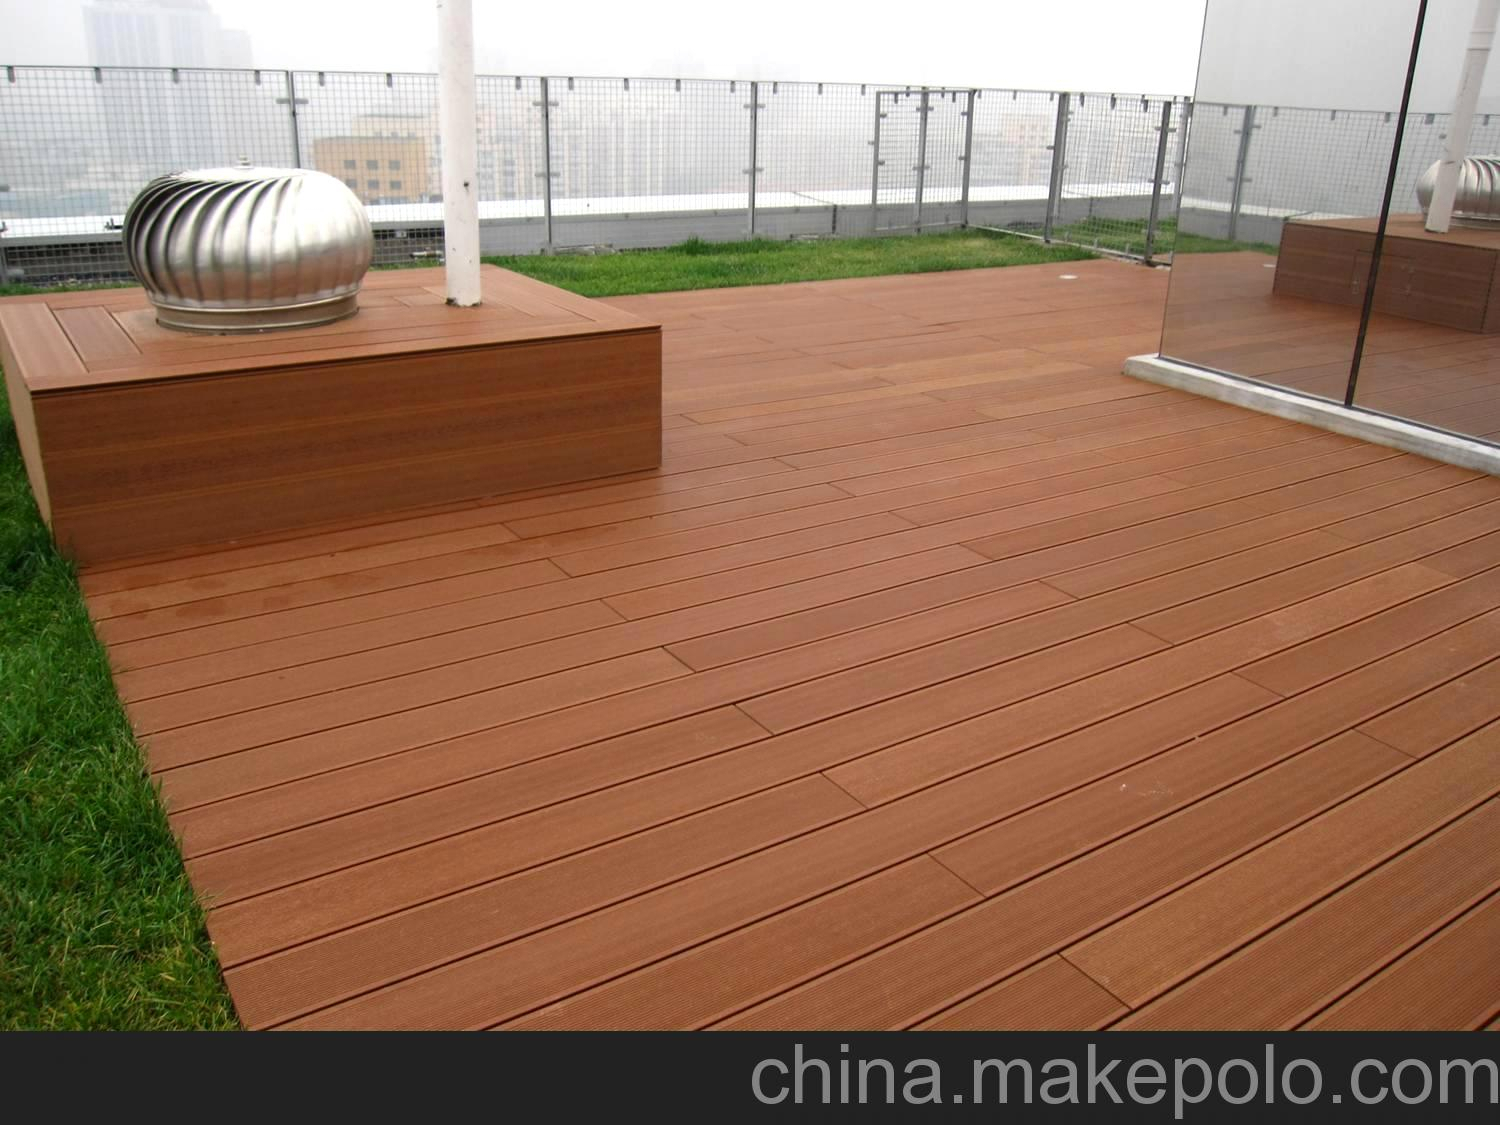 Composite Wood Deck Tiles Furniture Home Decor pertaining to size 1500 X 1125